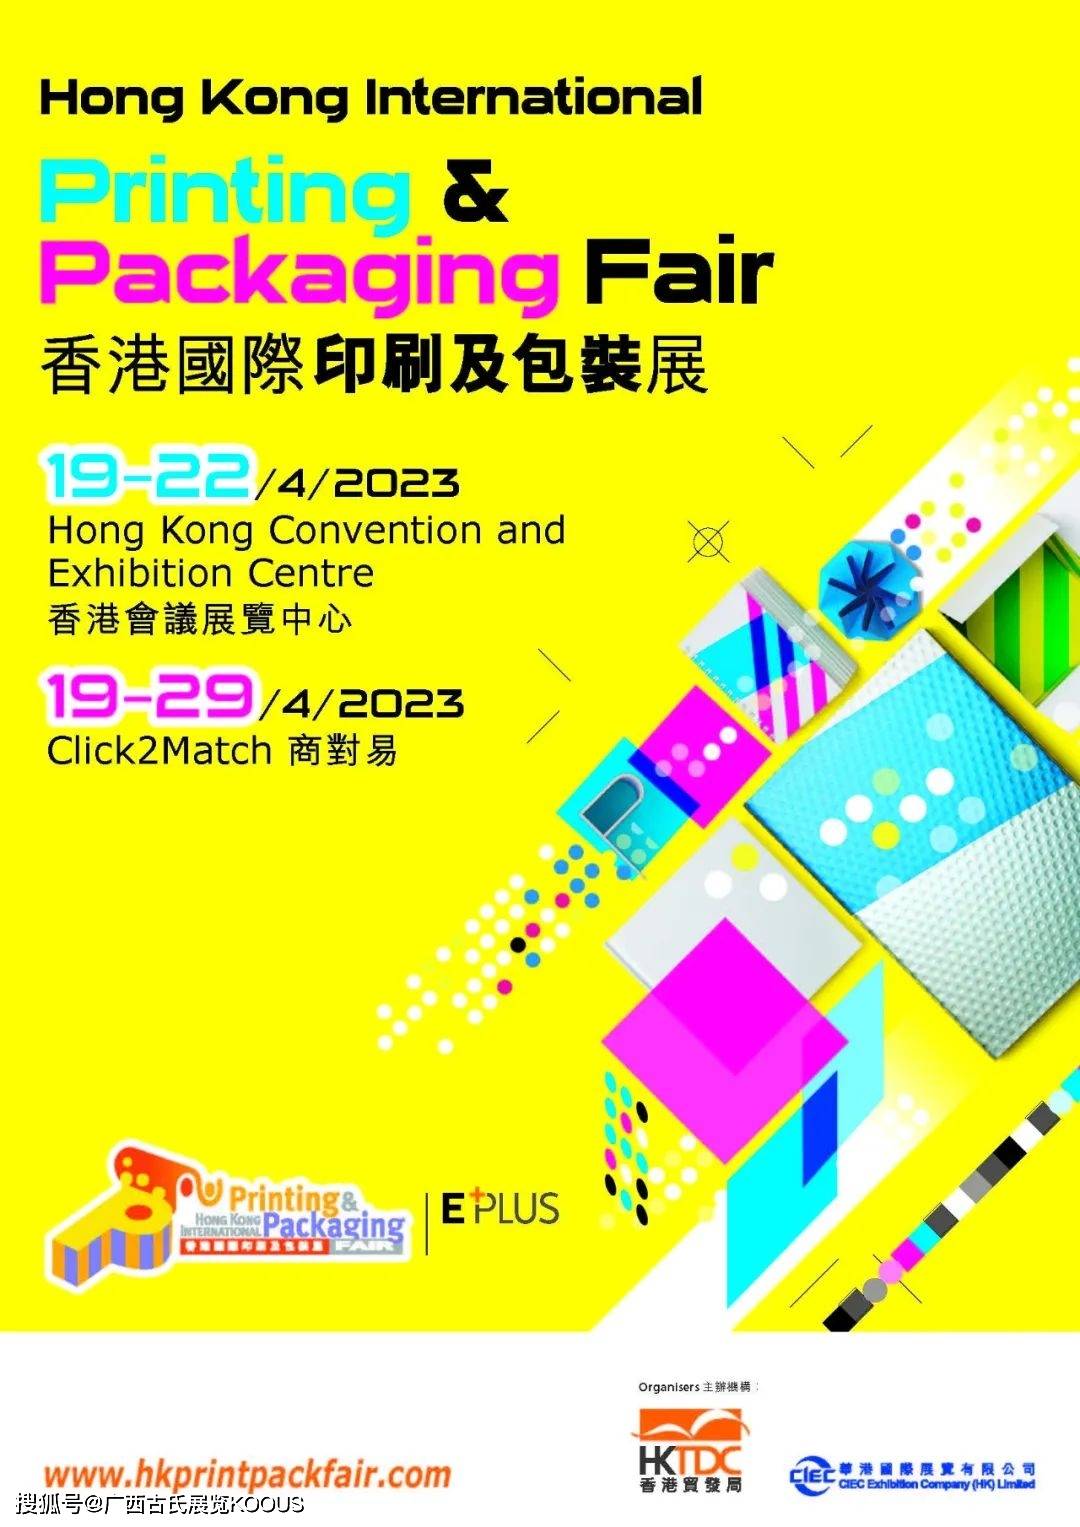 We will attend 2023 Hong Kong International Printing & Packaging Fair Welcome to visit our booth: 3F-F42